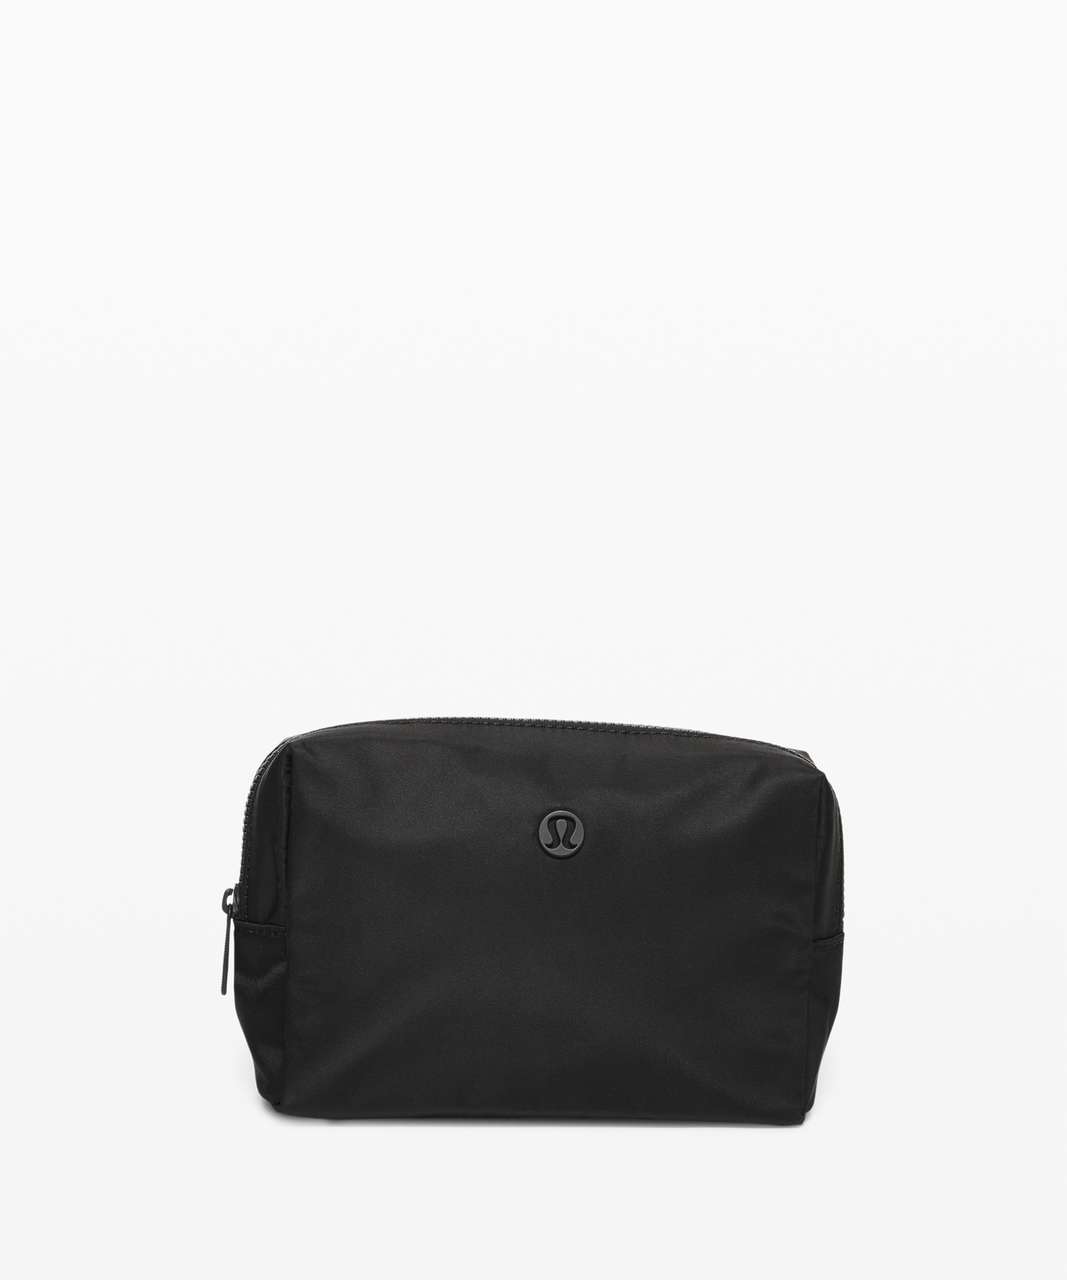 Lululemon All Your Small Things Pouch *Mini 2L - Black (First Release)